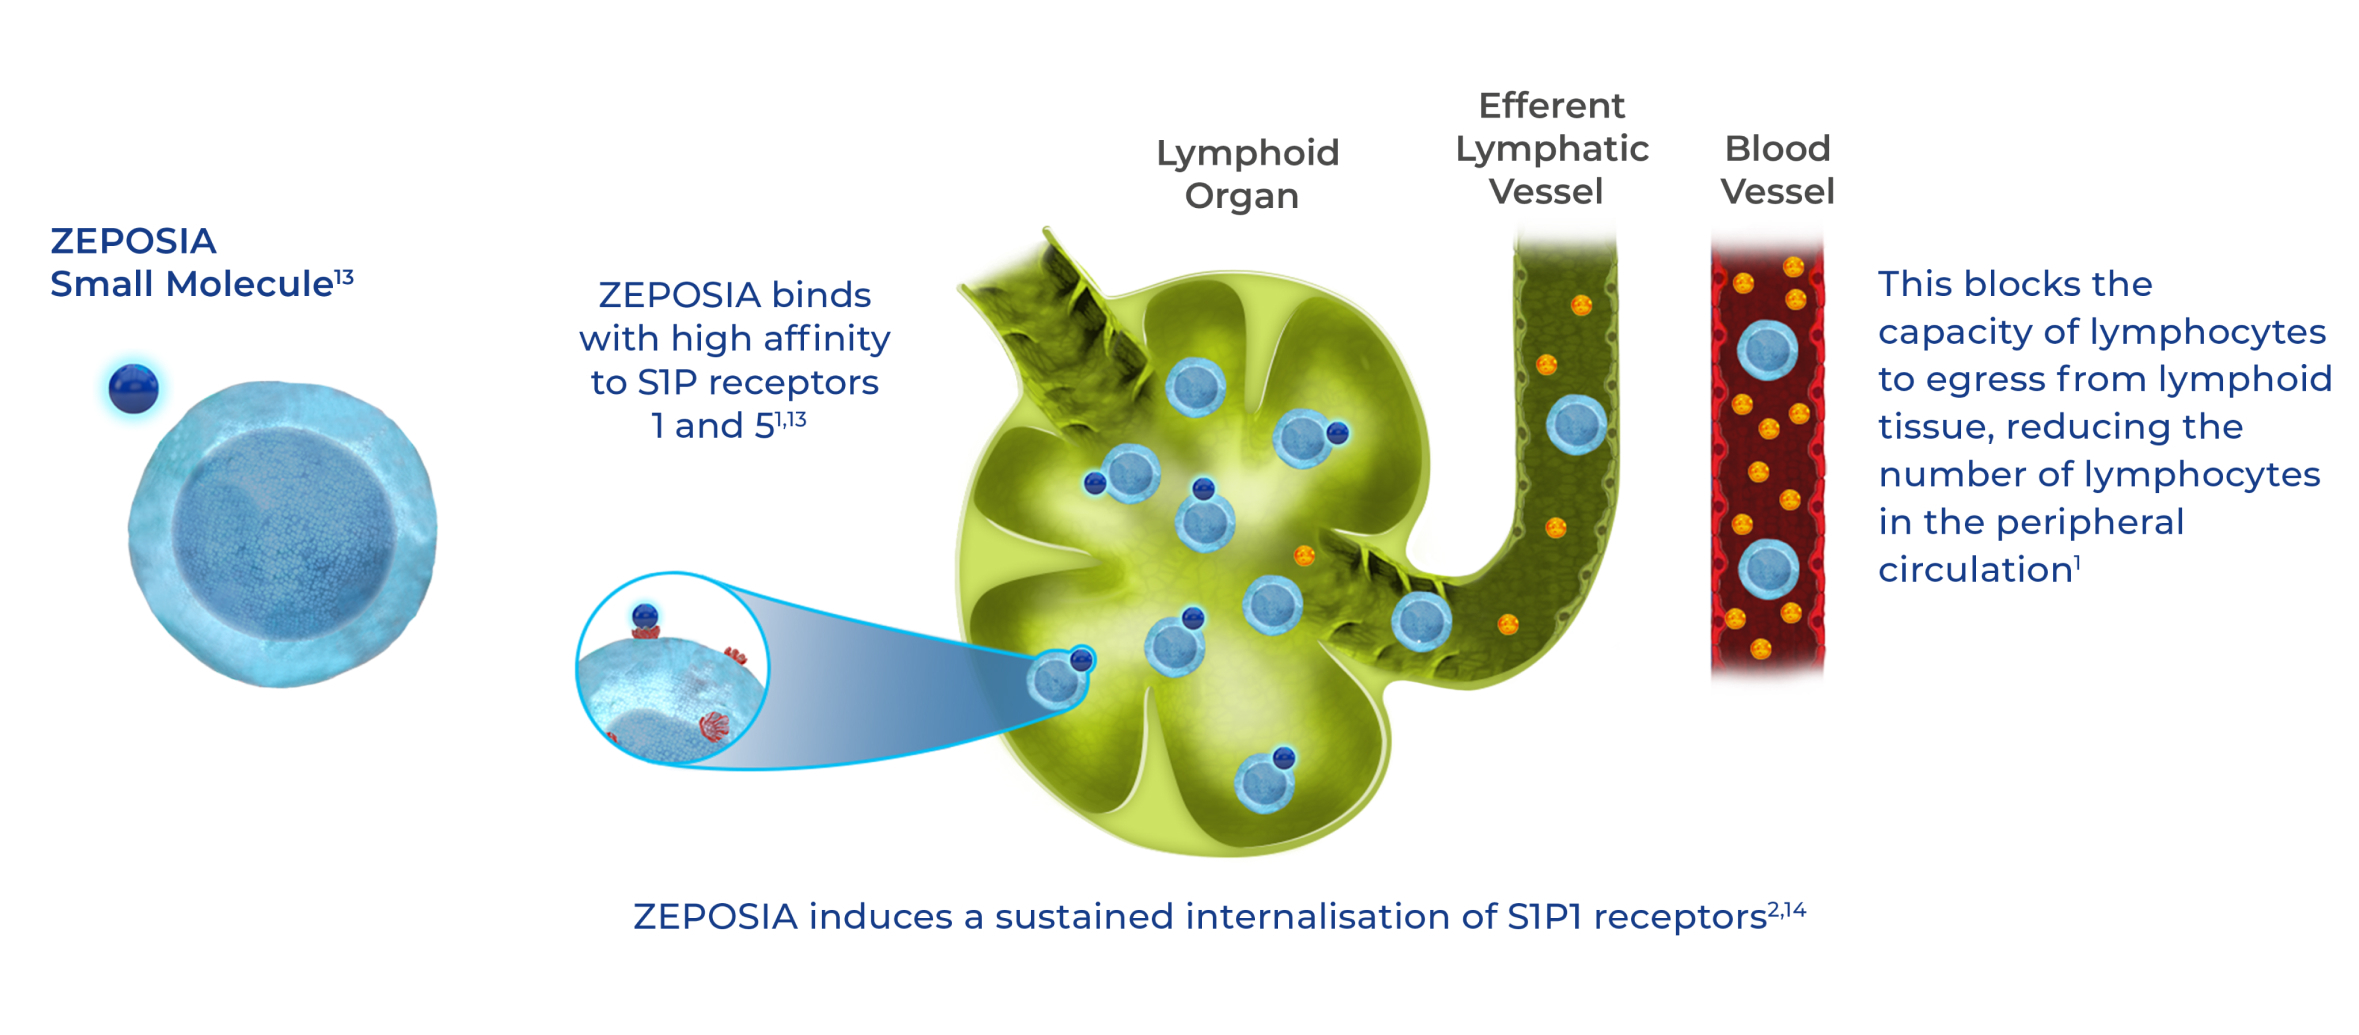 Diagram showing ZEPOSIA small molecule bound to S1P receptors 1 and 5 on lymphocytes in a lymphoid organ, alongside an efferent lymphatic veseel and a blood vessel with circulating lymphocytes 